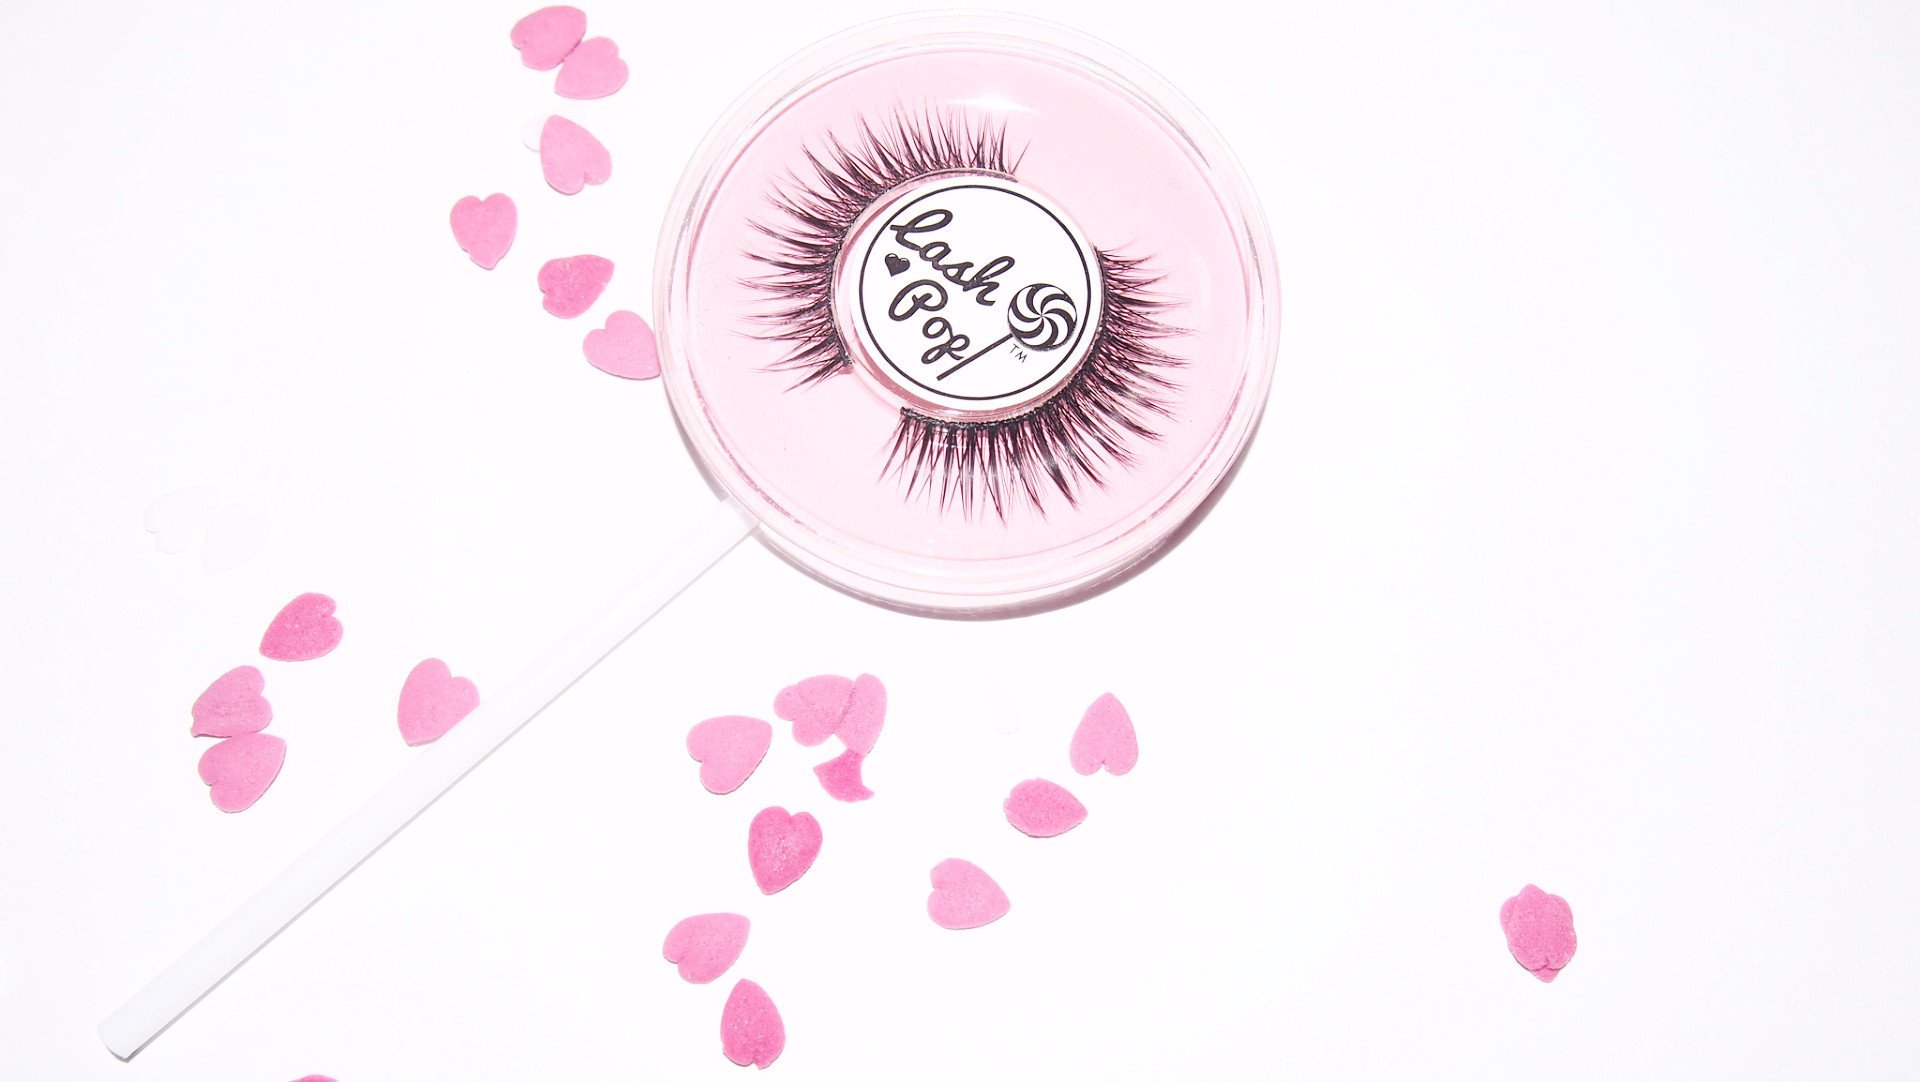 Lash Pop Lashes - In the Pink